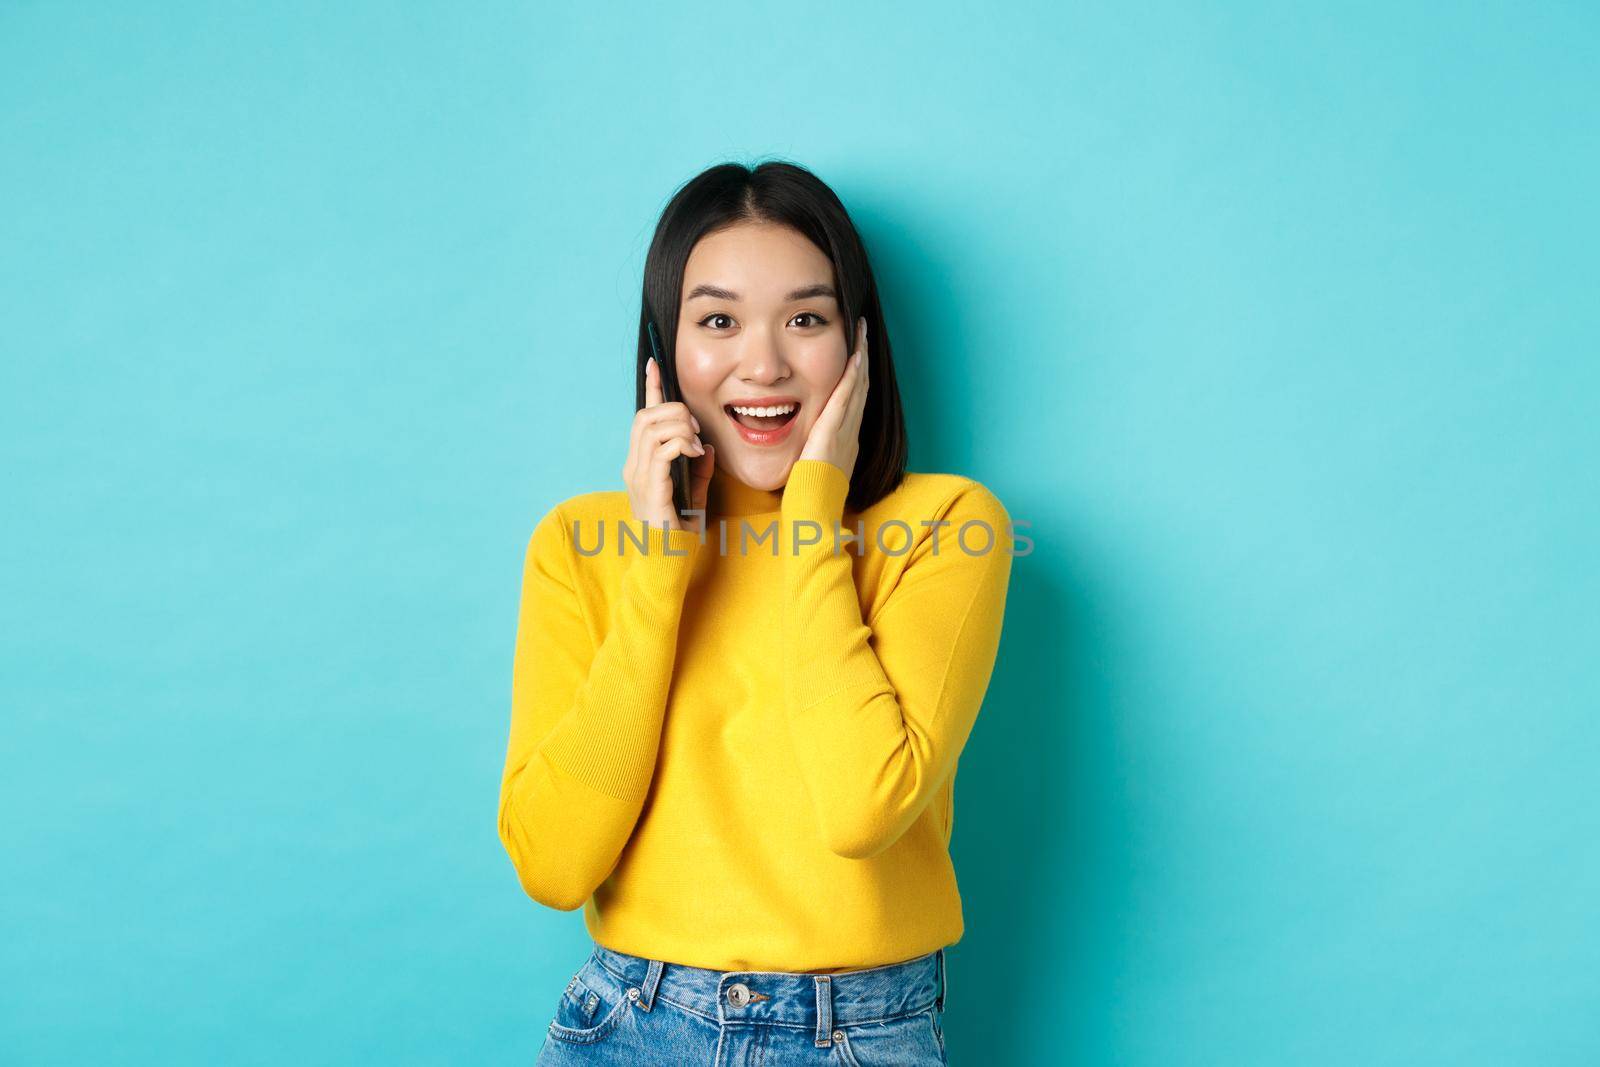 Happy asian woman receive offer on phone call, smiling while talking on smartphone, standing over blue background.